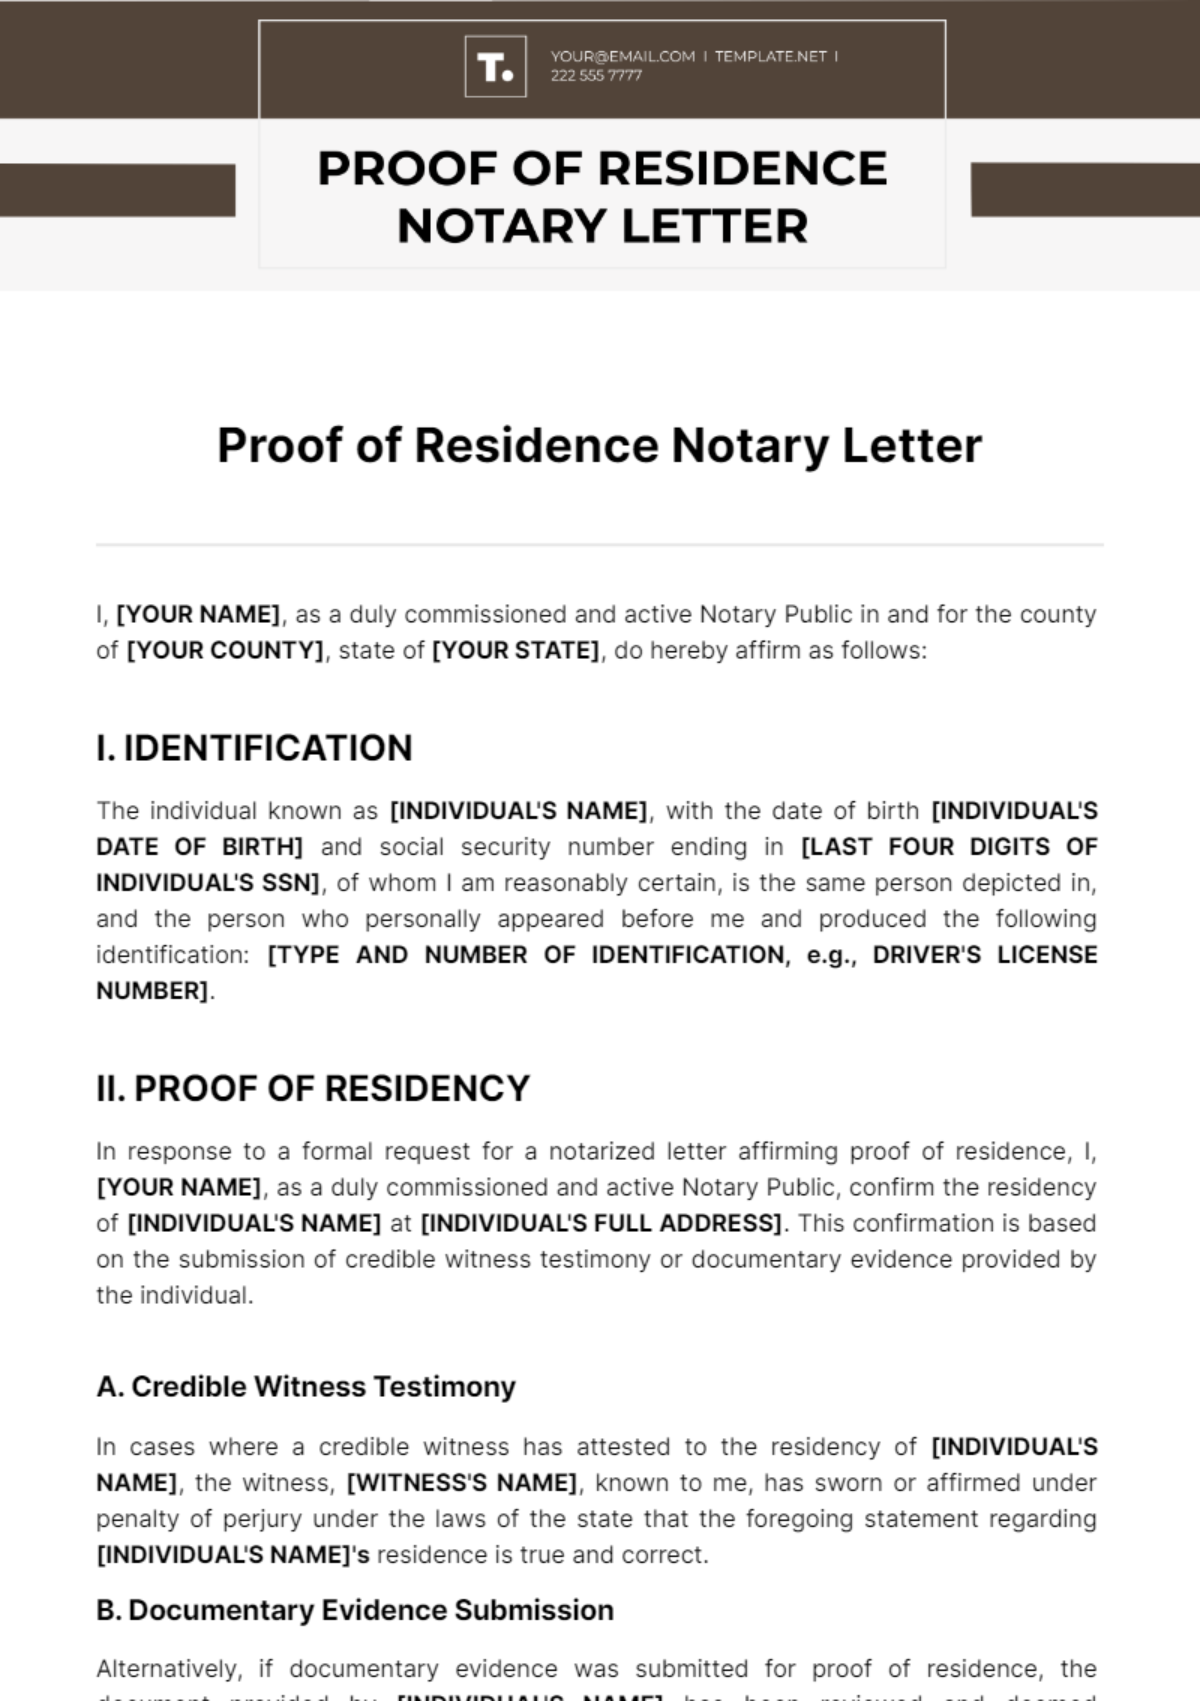 Proof of Residence Notary Letter Template